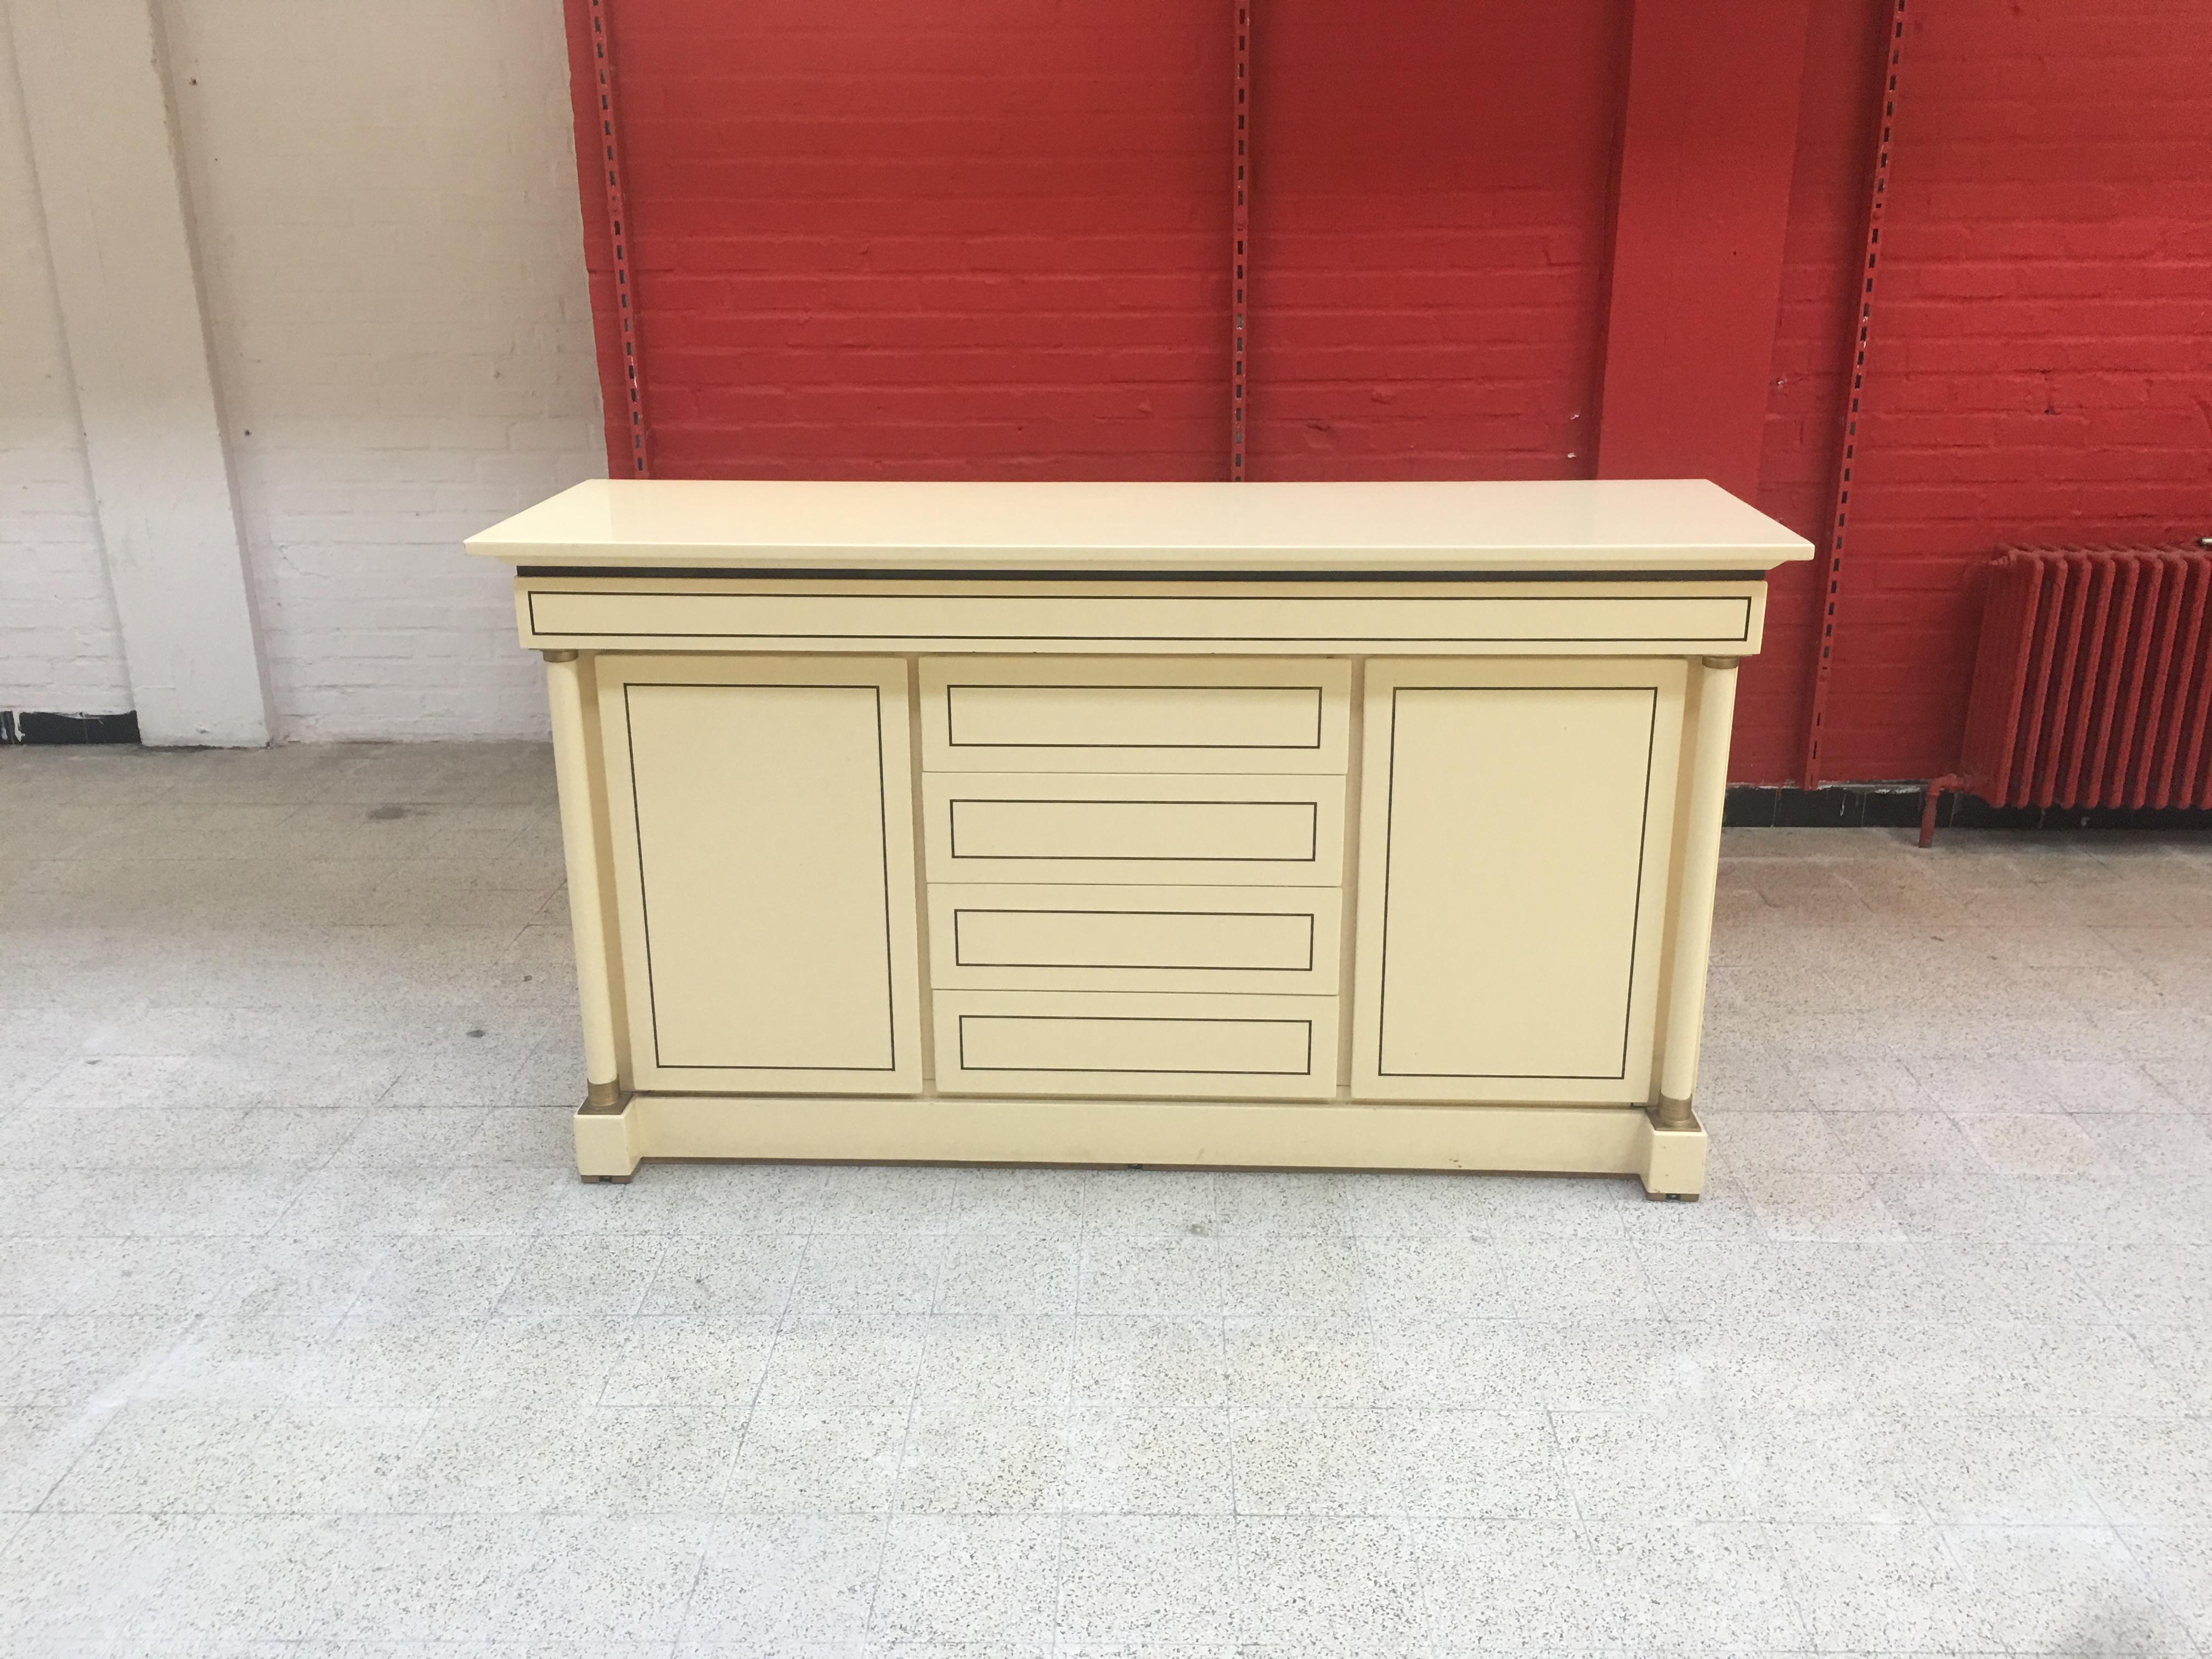 Maison Jean Charles, neoclassic buffet in lacquered wood and brass, circa 1970-1980
Opening with 2 doors and 4 drawers, good general condition, small scratches of use.